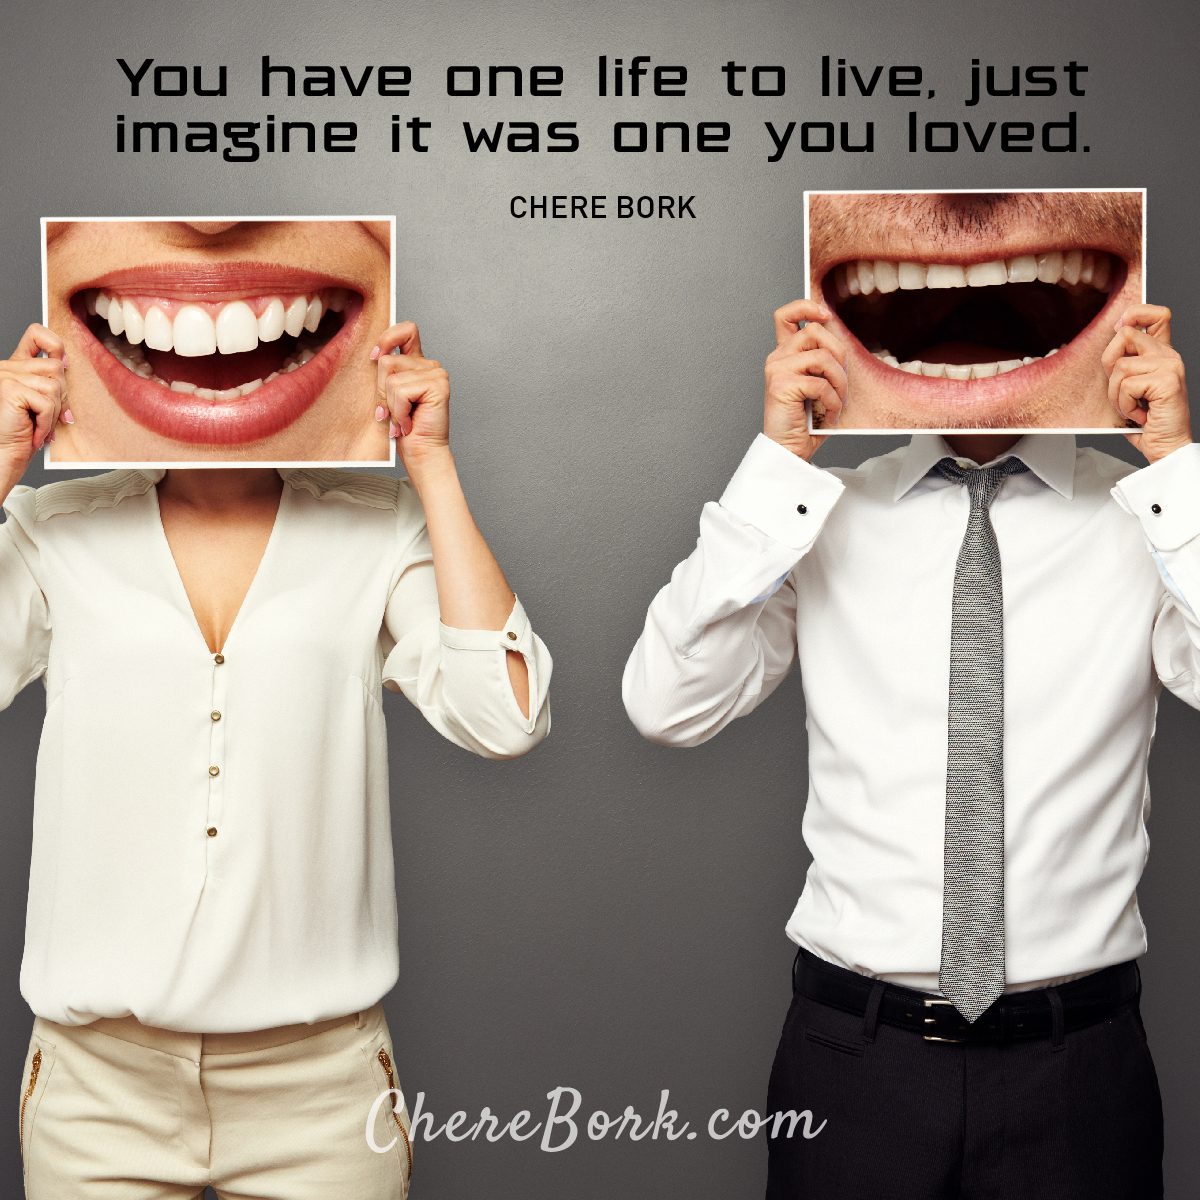 You have one life to live. Just imagine if it was one you loved. -Chere Bork